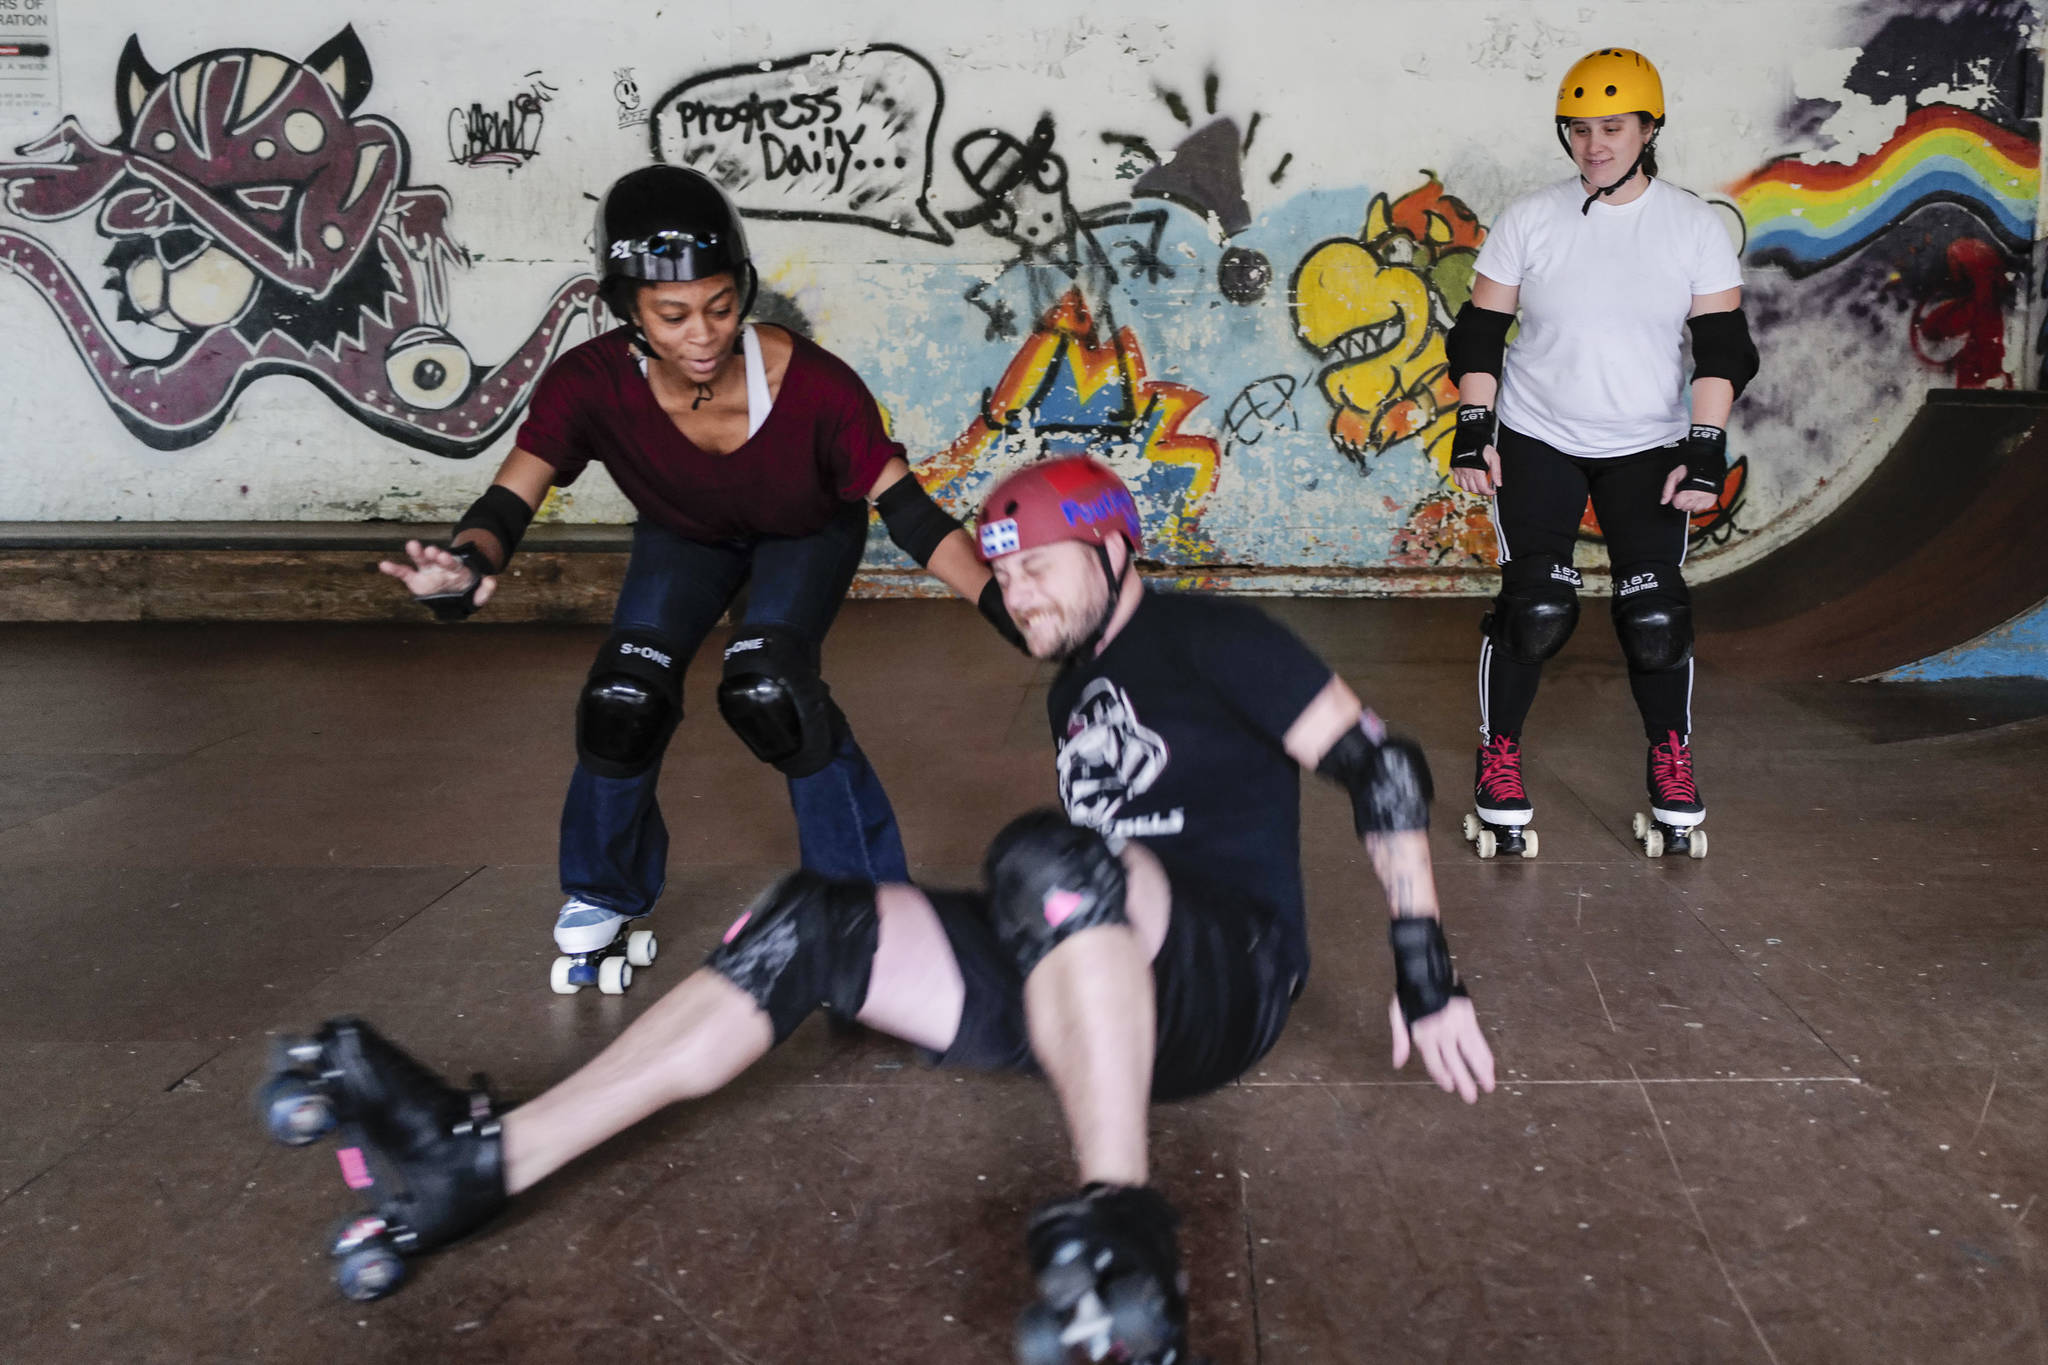 Skate or try: I took a shot at rolling with derby girls